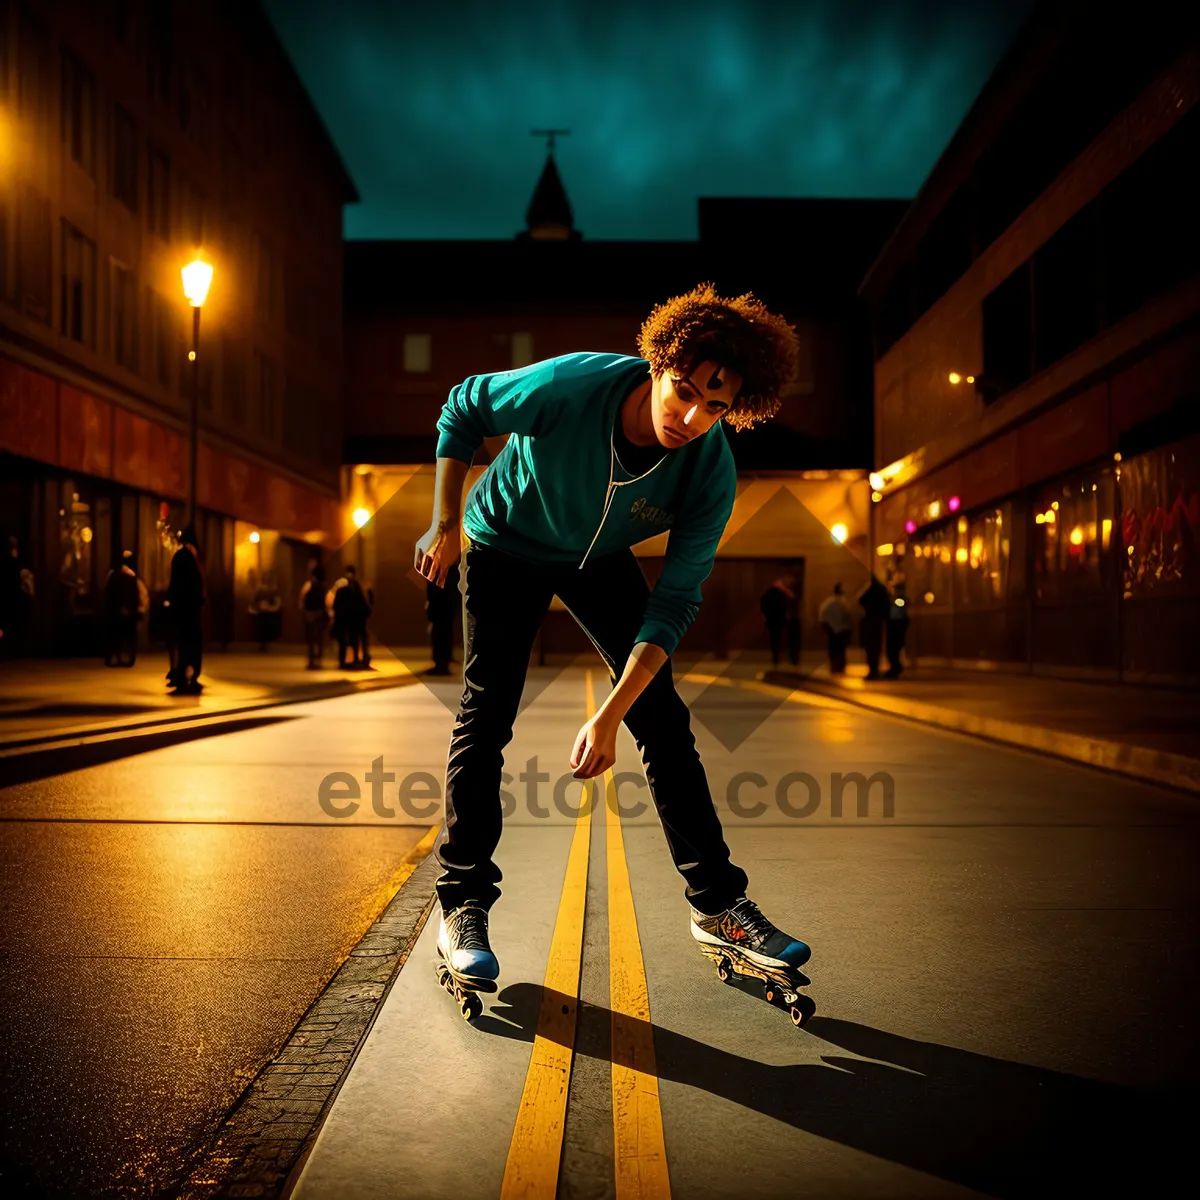 Picture of Skateboarder with Hockey Stick in Action